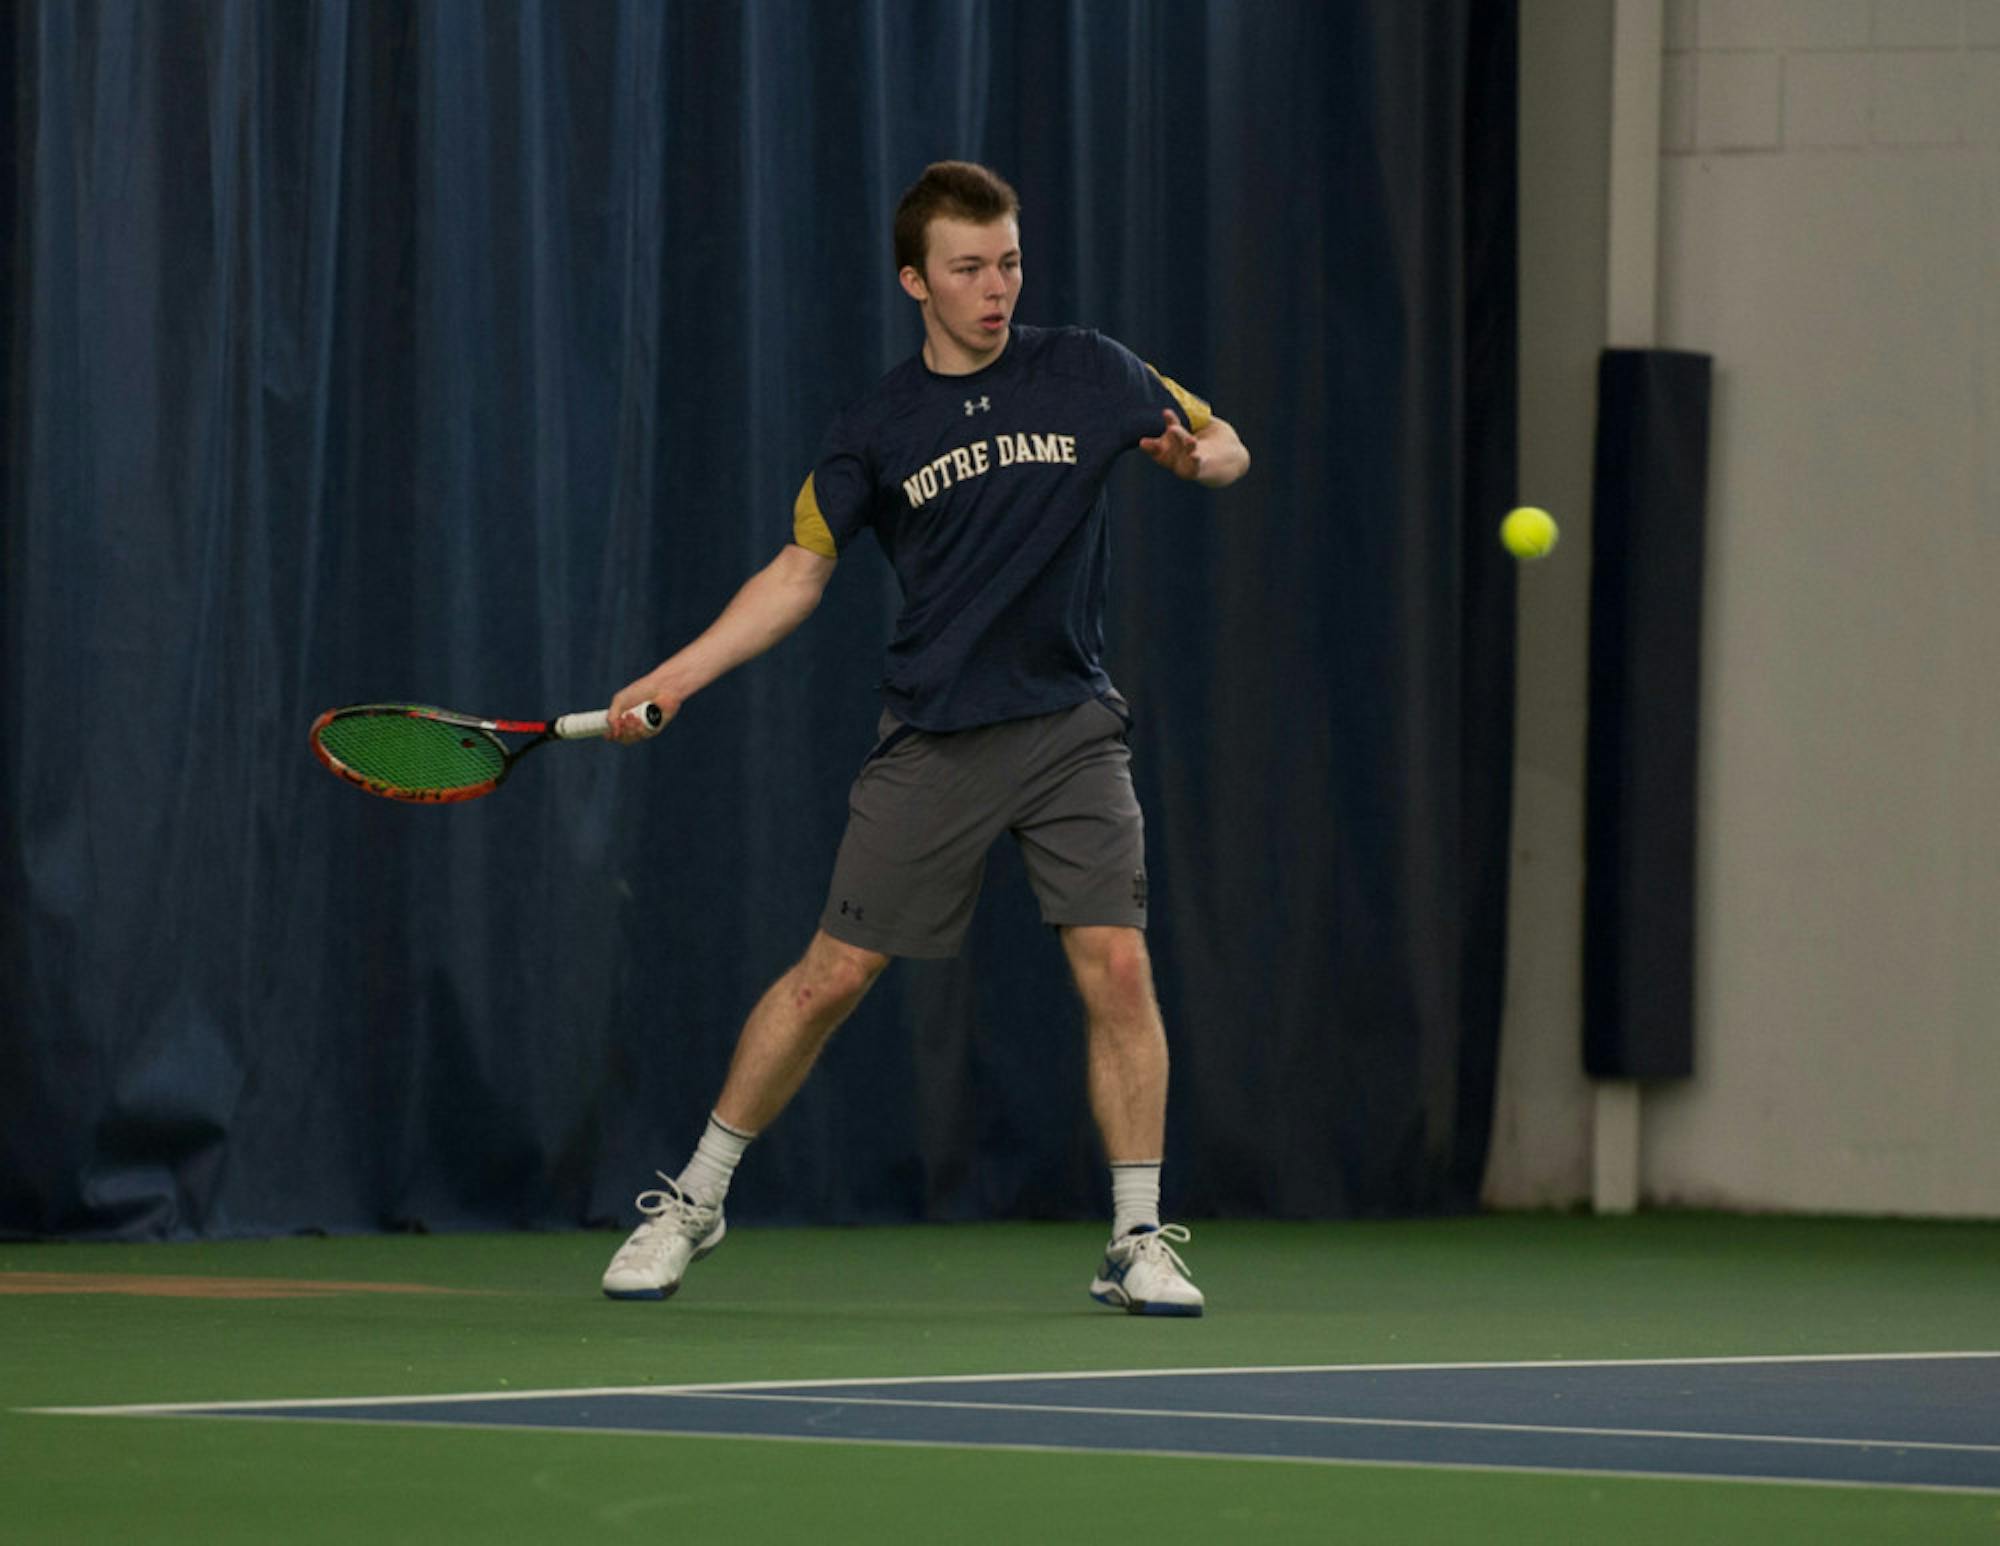 Irish sophomore Matt Gamble hits a forehand during Notre Dame's 7-0 win over Boston College on Feb. 11 at Eck Tennis Pavilion.